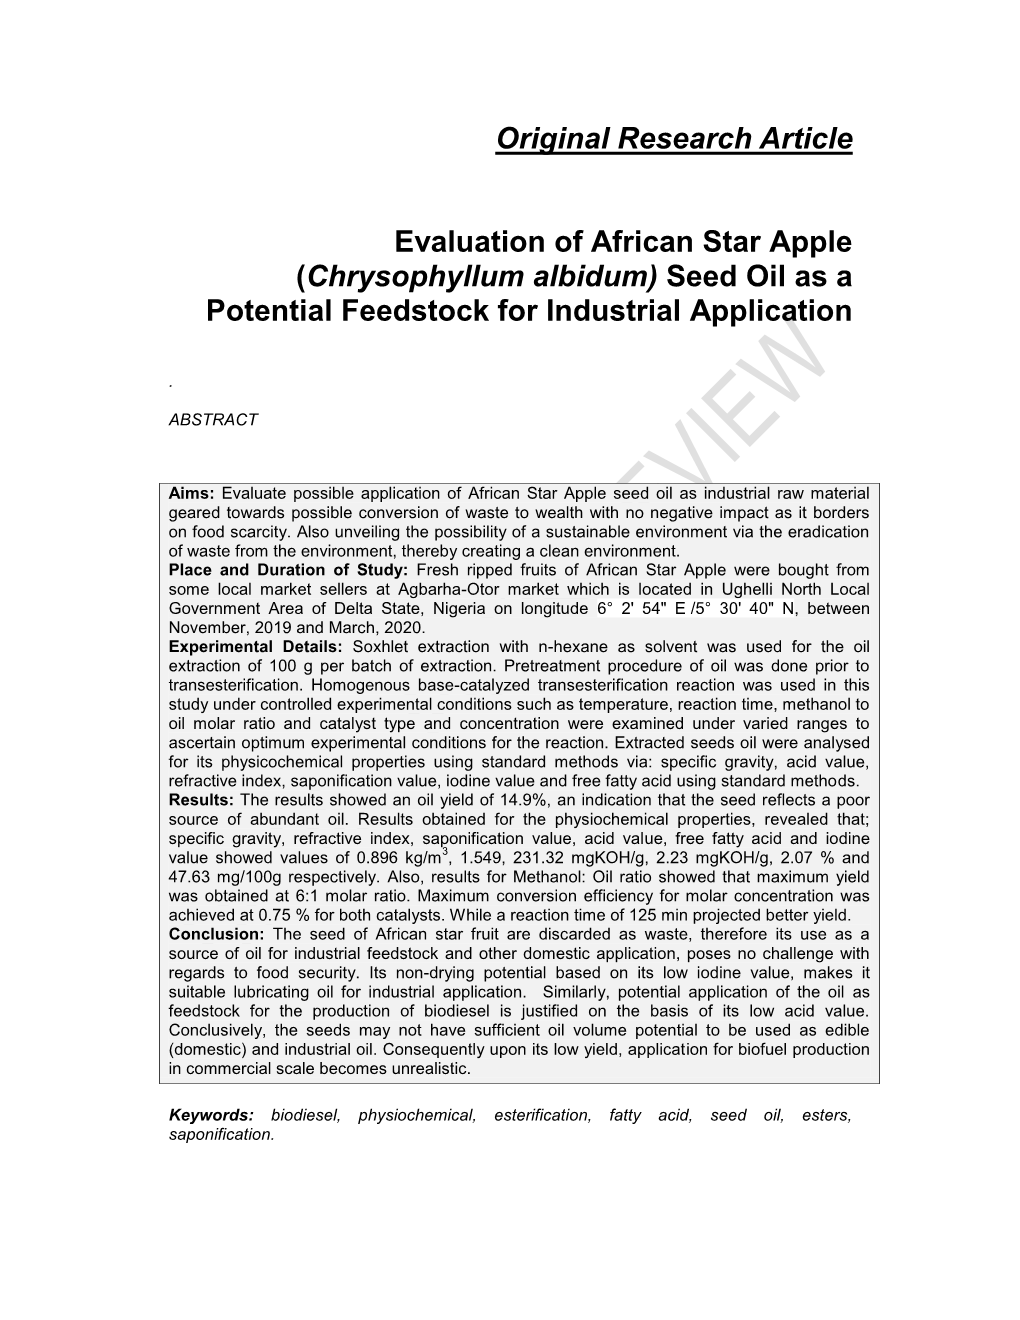 Original Research Article Evaluation of African Star Apple (Chrysophyllum Albidum) Seed Oil As a Potential Feedstock for Industr